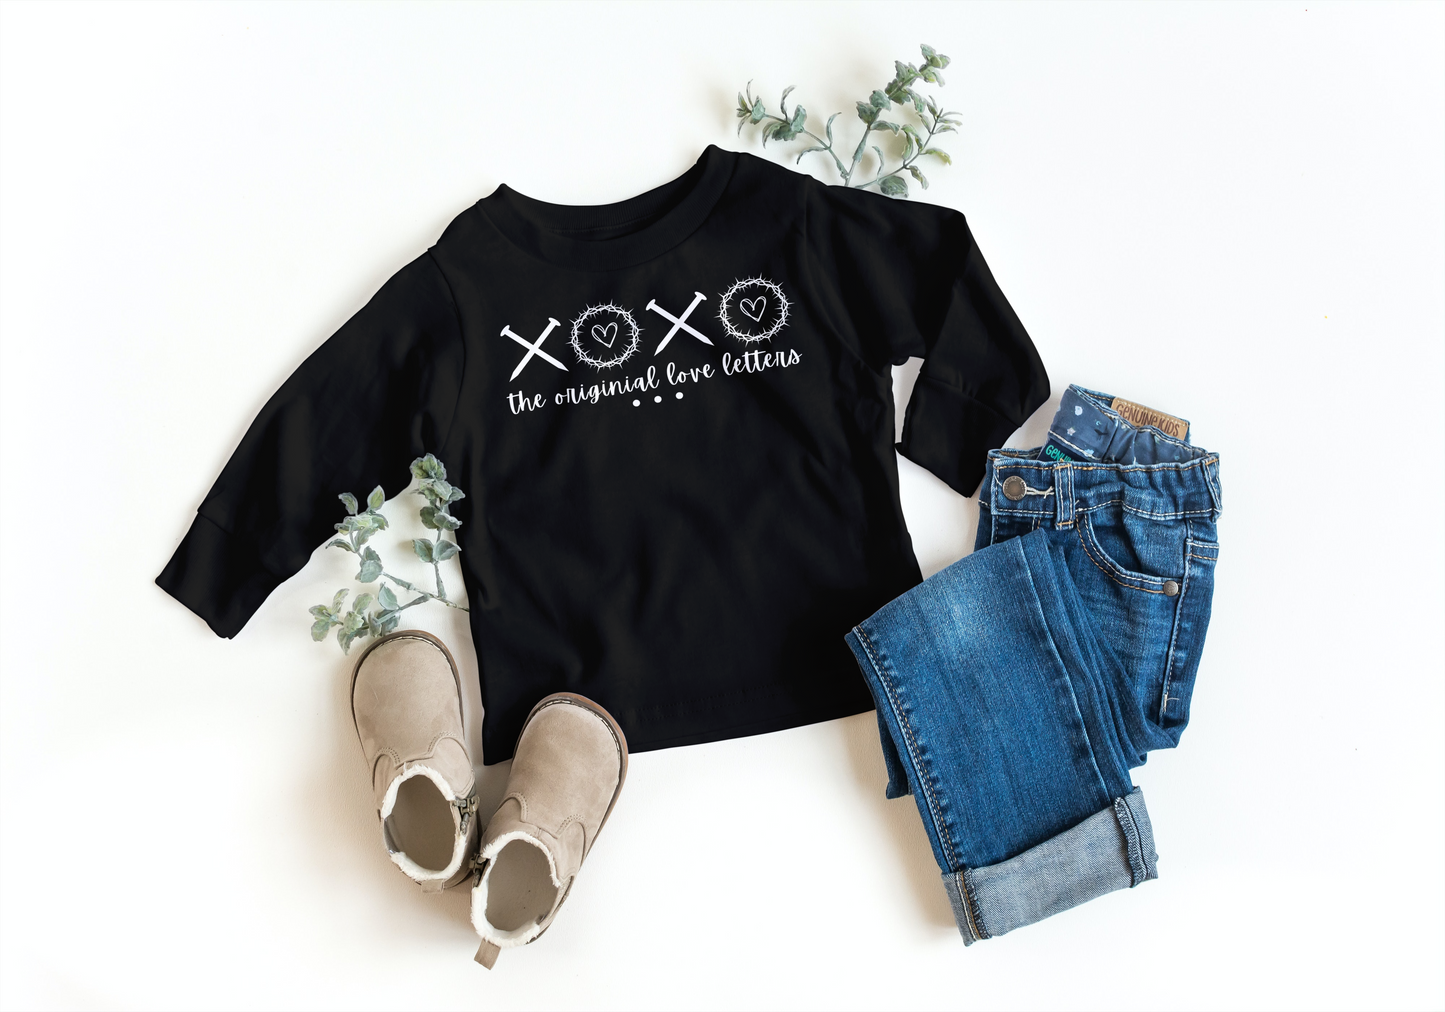 The Original Love Letters Shirt | Faith Gift For Her